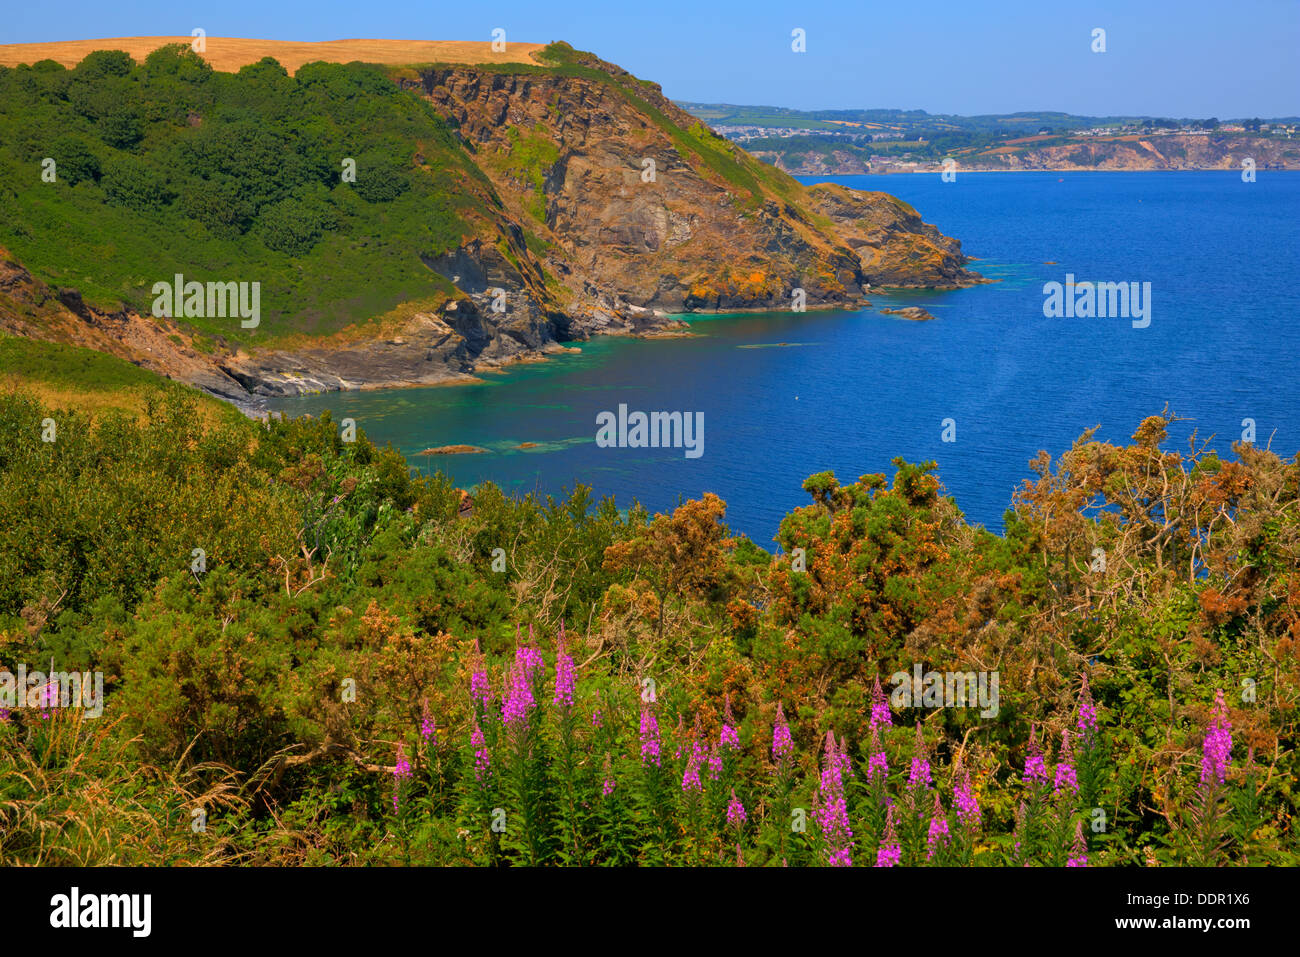 St Austell Bay Cornwall from Black Head headland between Porthpean and Pentewan England with pink flowers Stock Photo